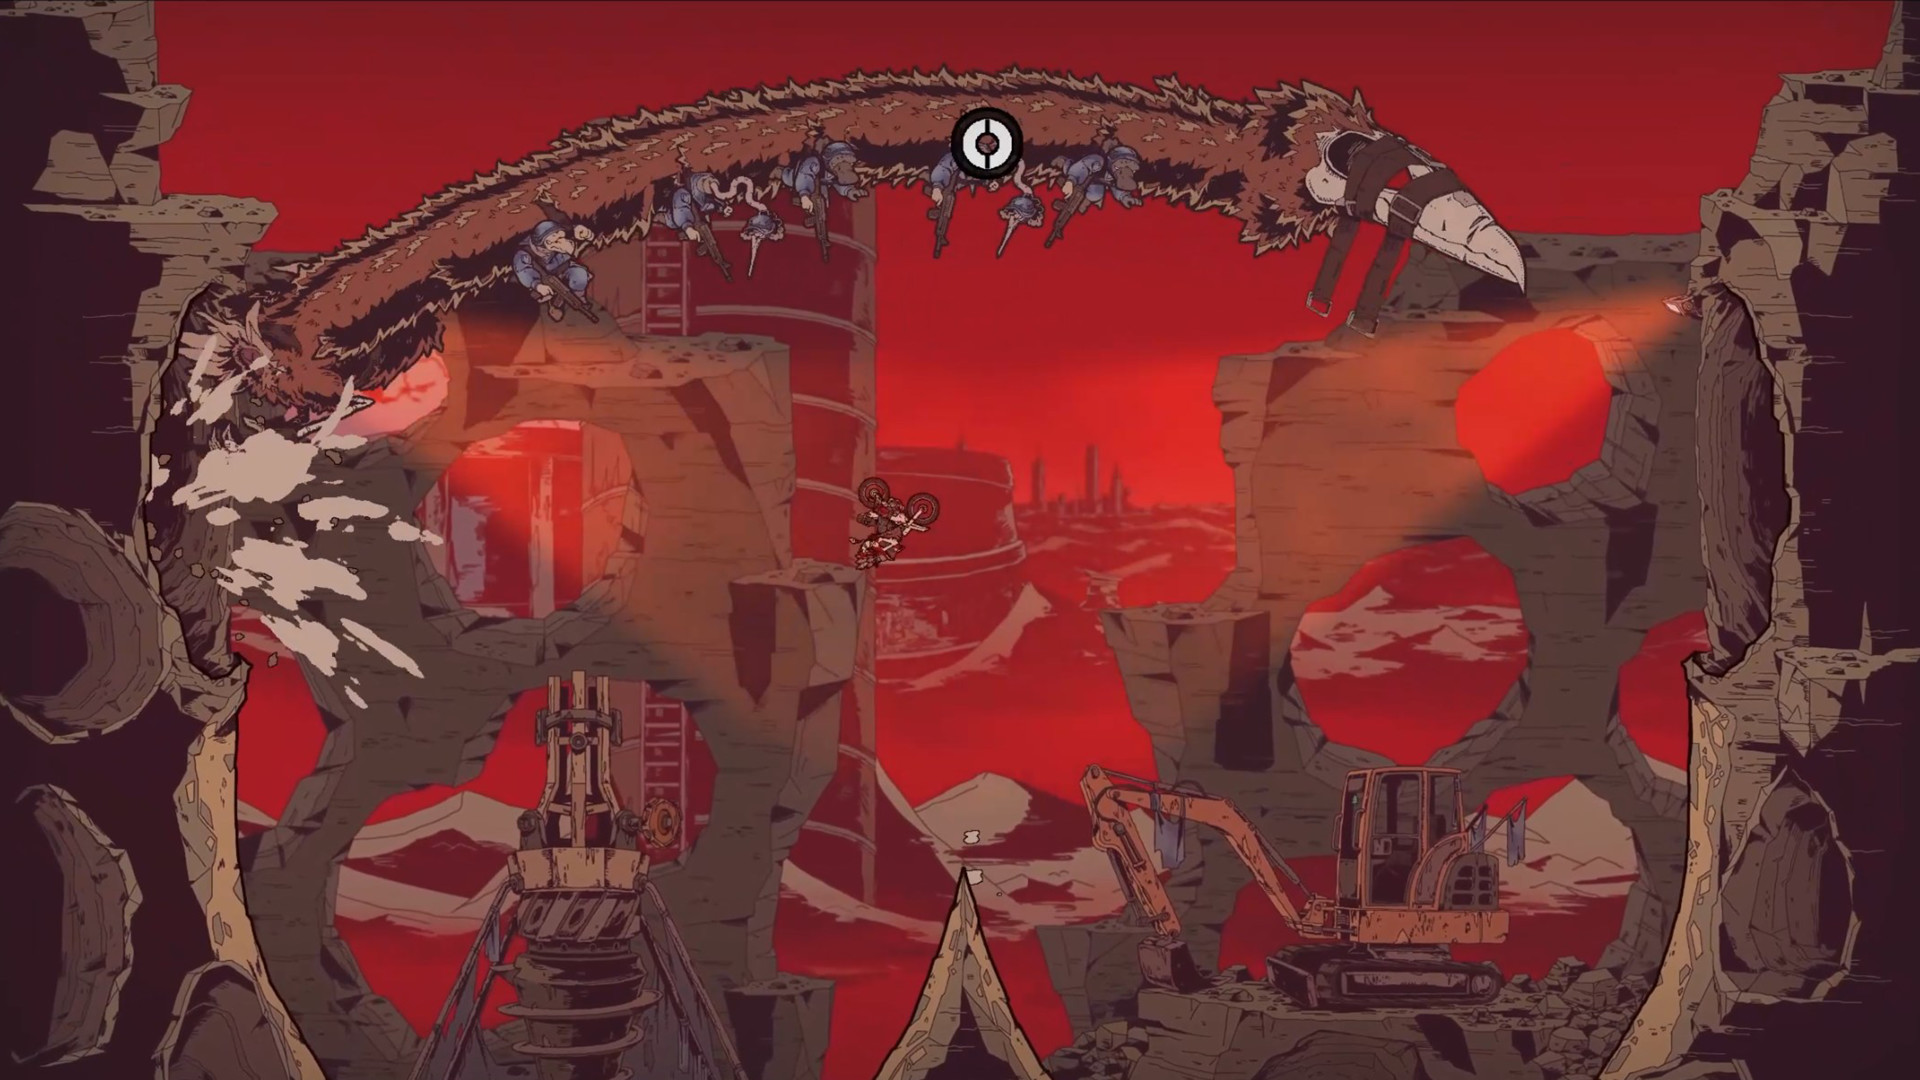 Laika: Aged Through Blood is a cowboy Mad Max Metroidvania on a motorcycle